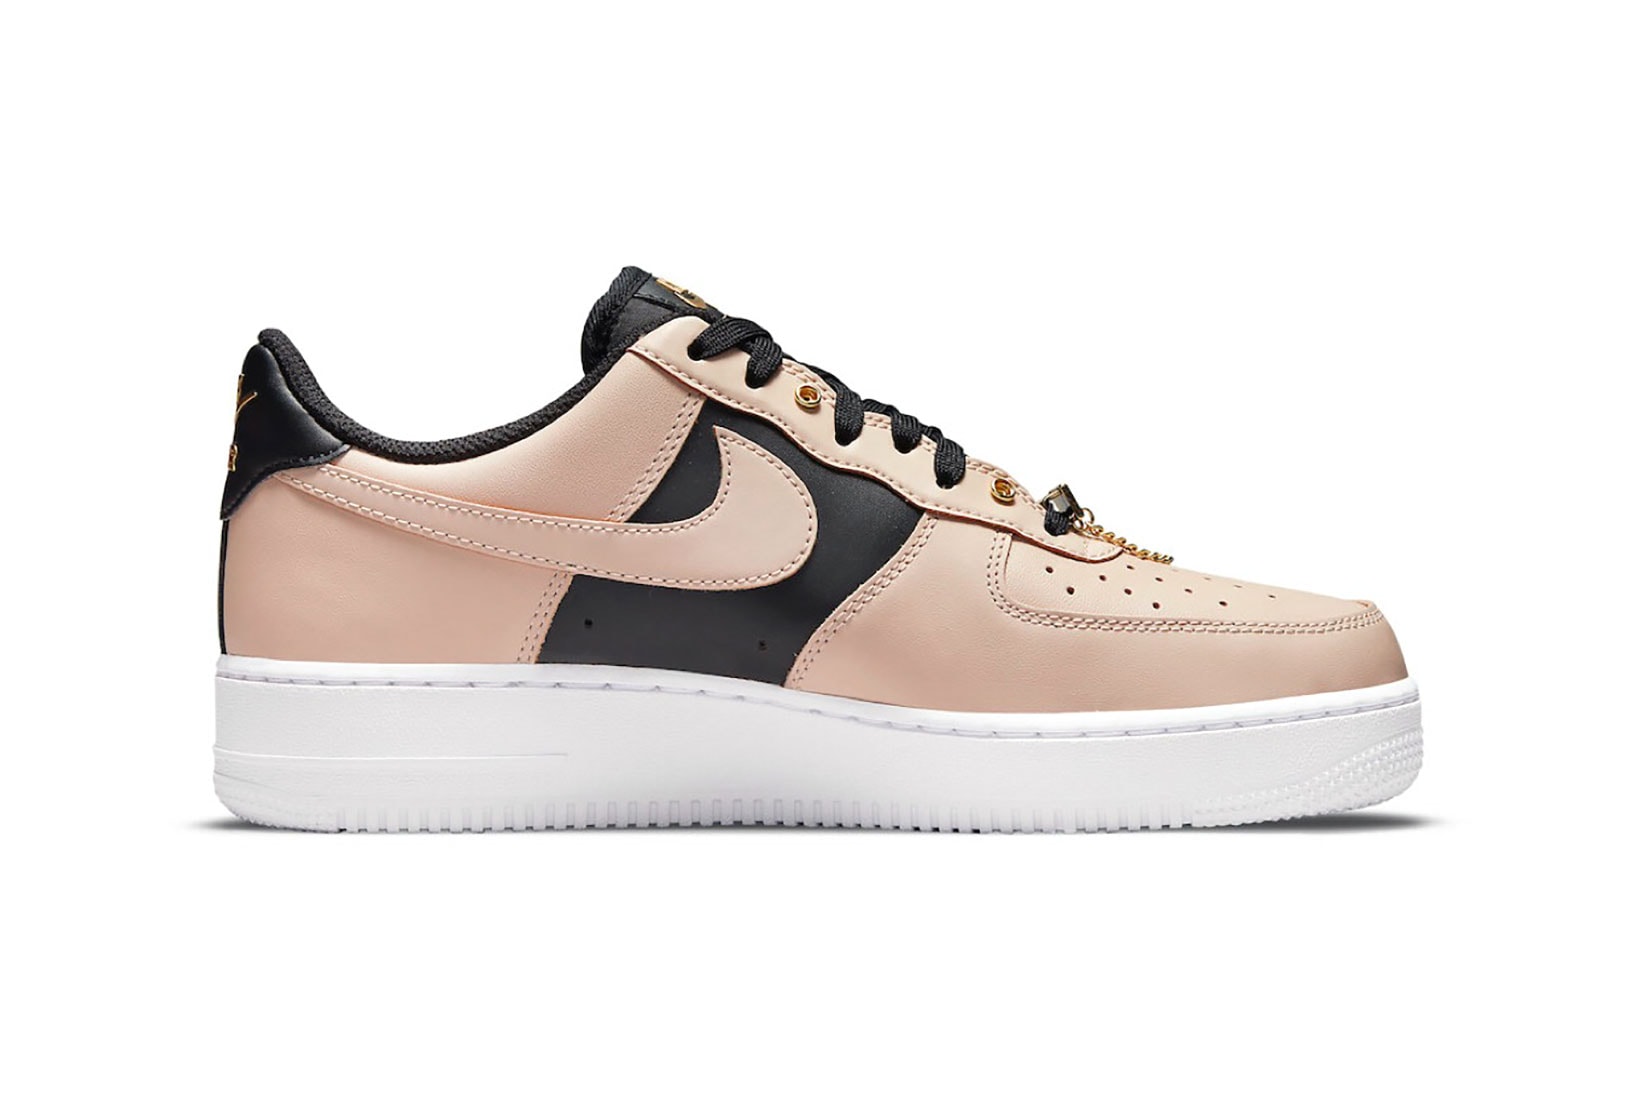 Nike Air Force 1 AF1 Particle Beige Tan Black Gold White Sneakers Shoes Kicks Footwear Lateral